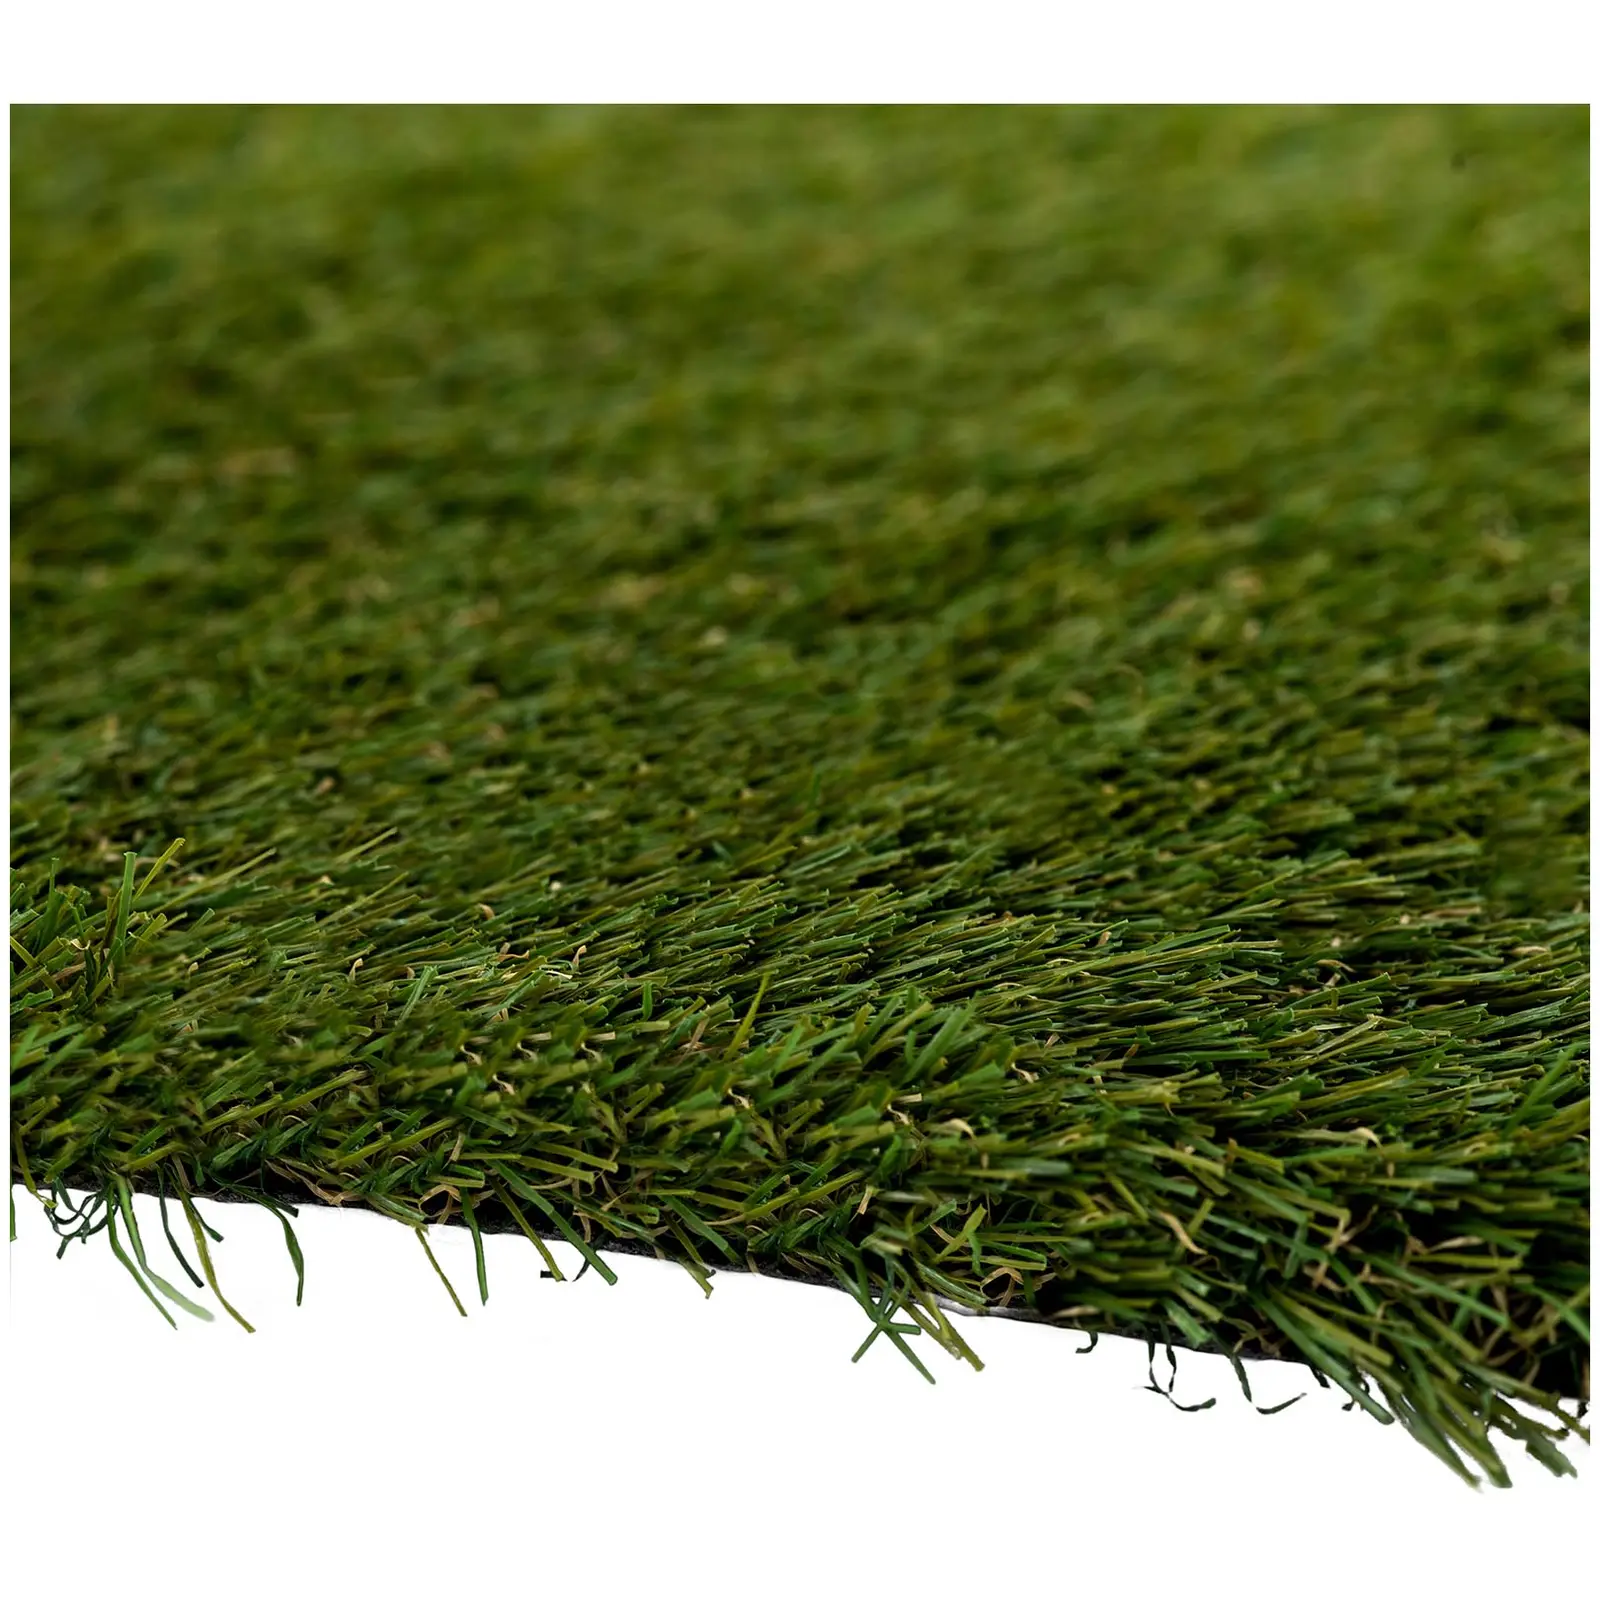 Artificial grass - 200 x 400 cm - Height: 30 mm - Stitch rate: 20/10 cm - UV-resistant